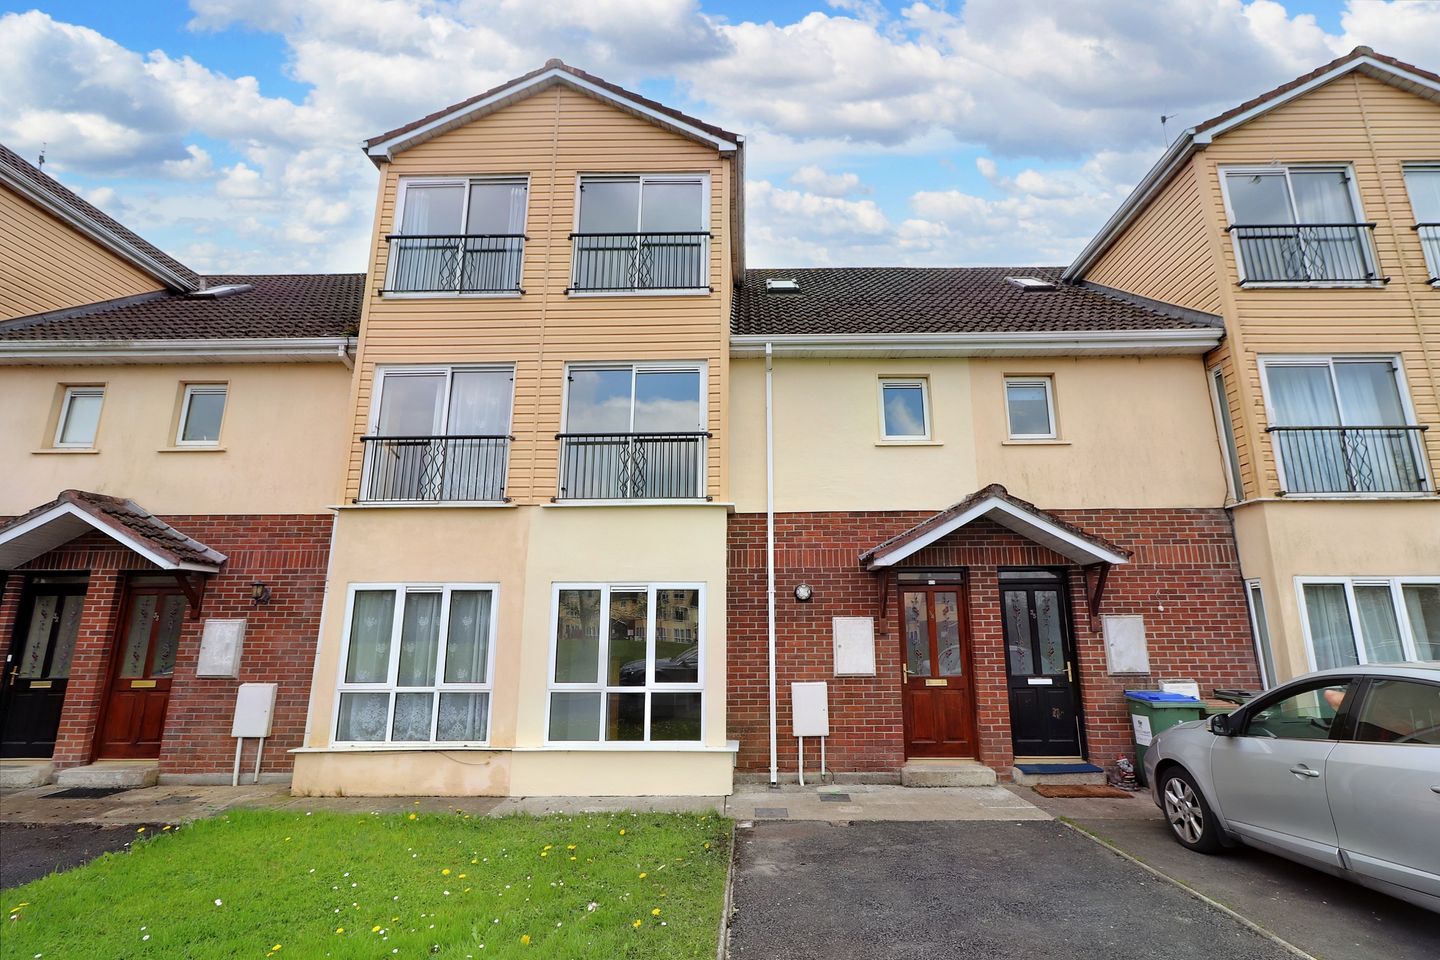 34 Willow Crescent, Riverbank, Annacotty, Co. Limerick